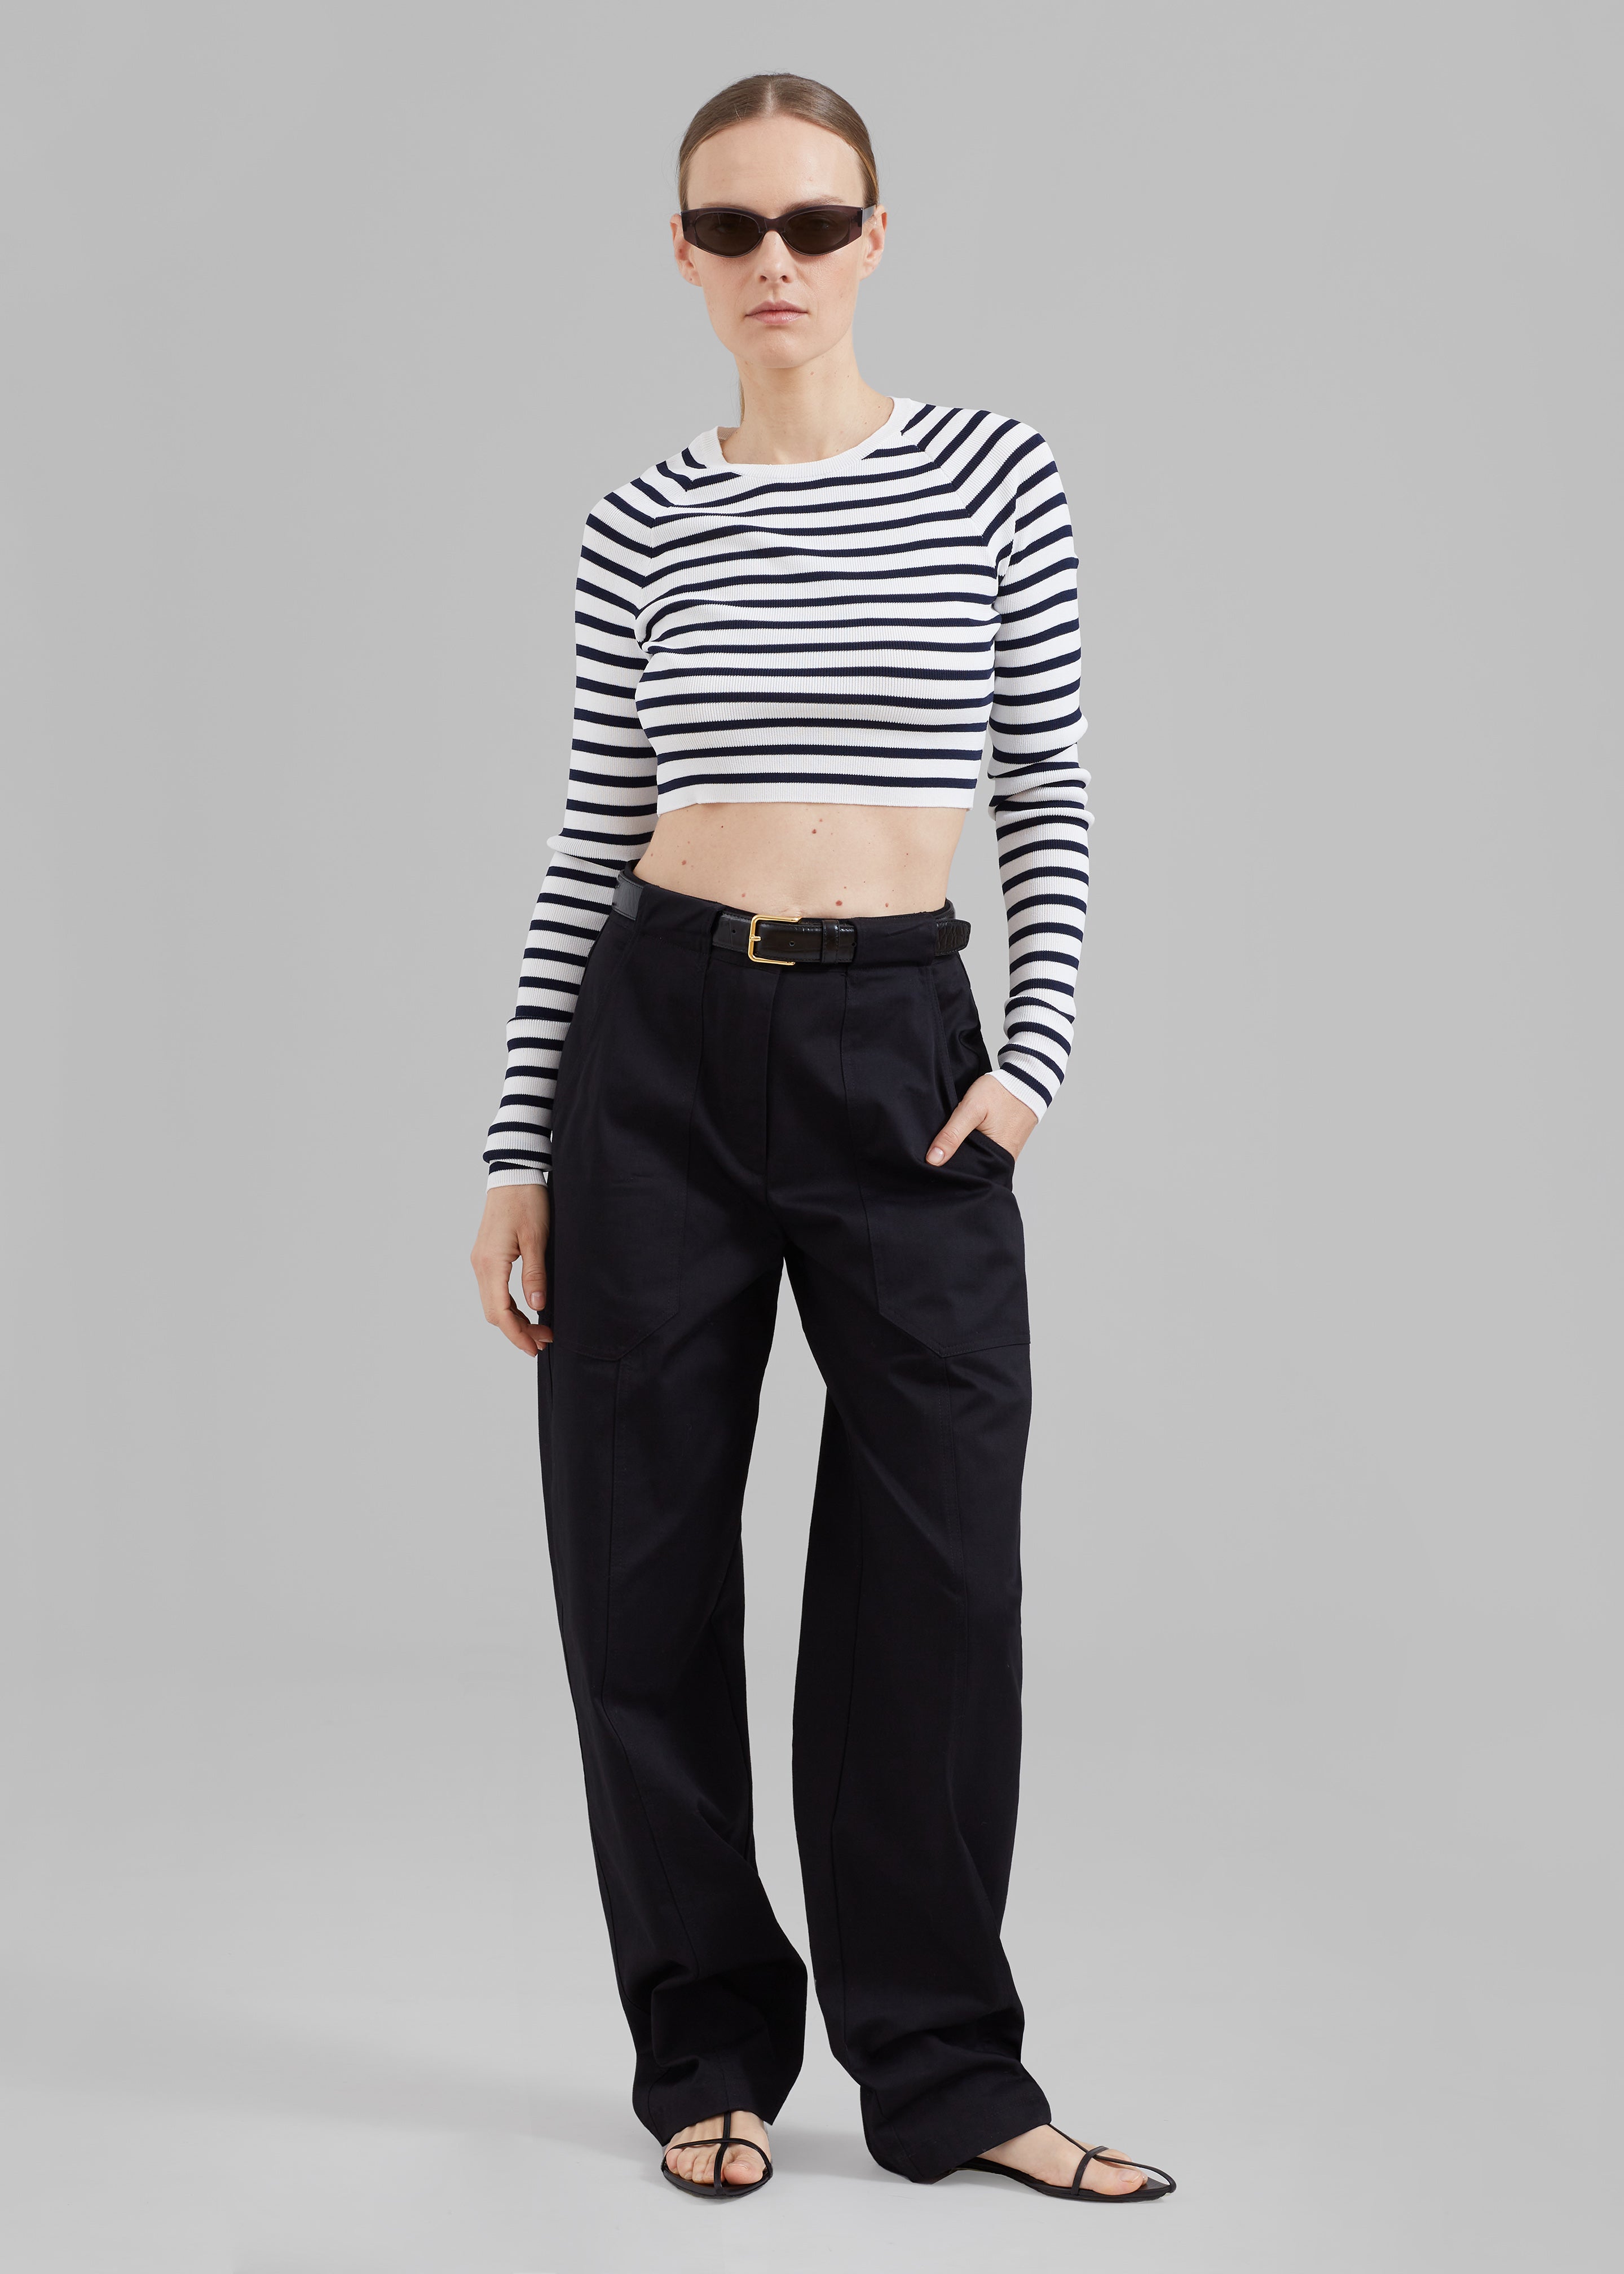 REMAIN Striped Knit Cropped Top - White Print - 3